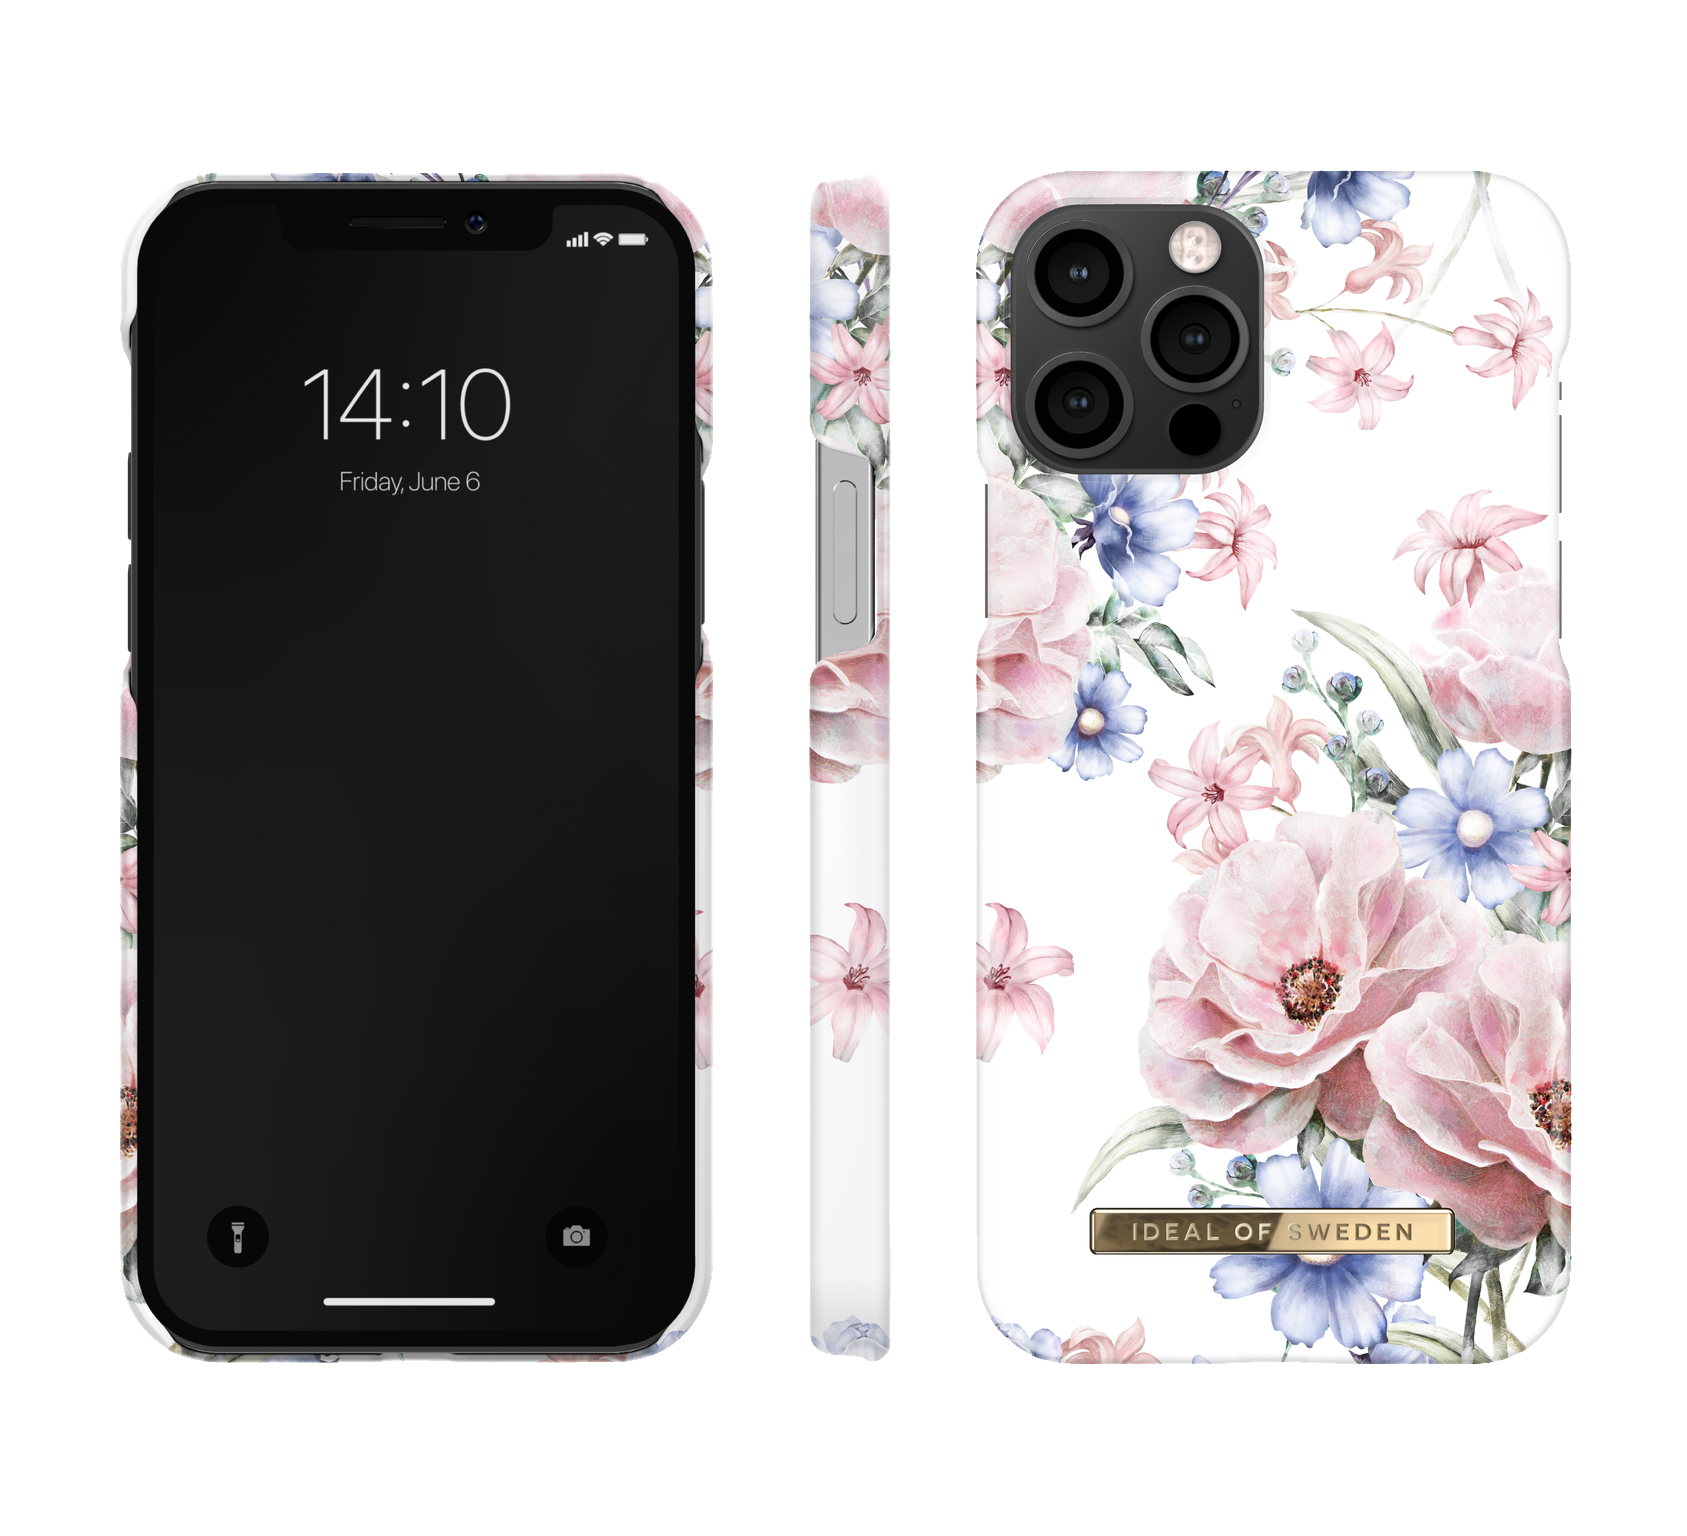 Romance Fashion IDEAL Pro, Backcover, 12, Case, iPhone Apple, SWEDEN iPhone 12 OF Floral